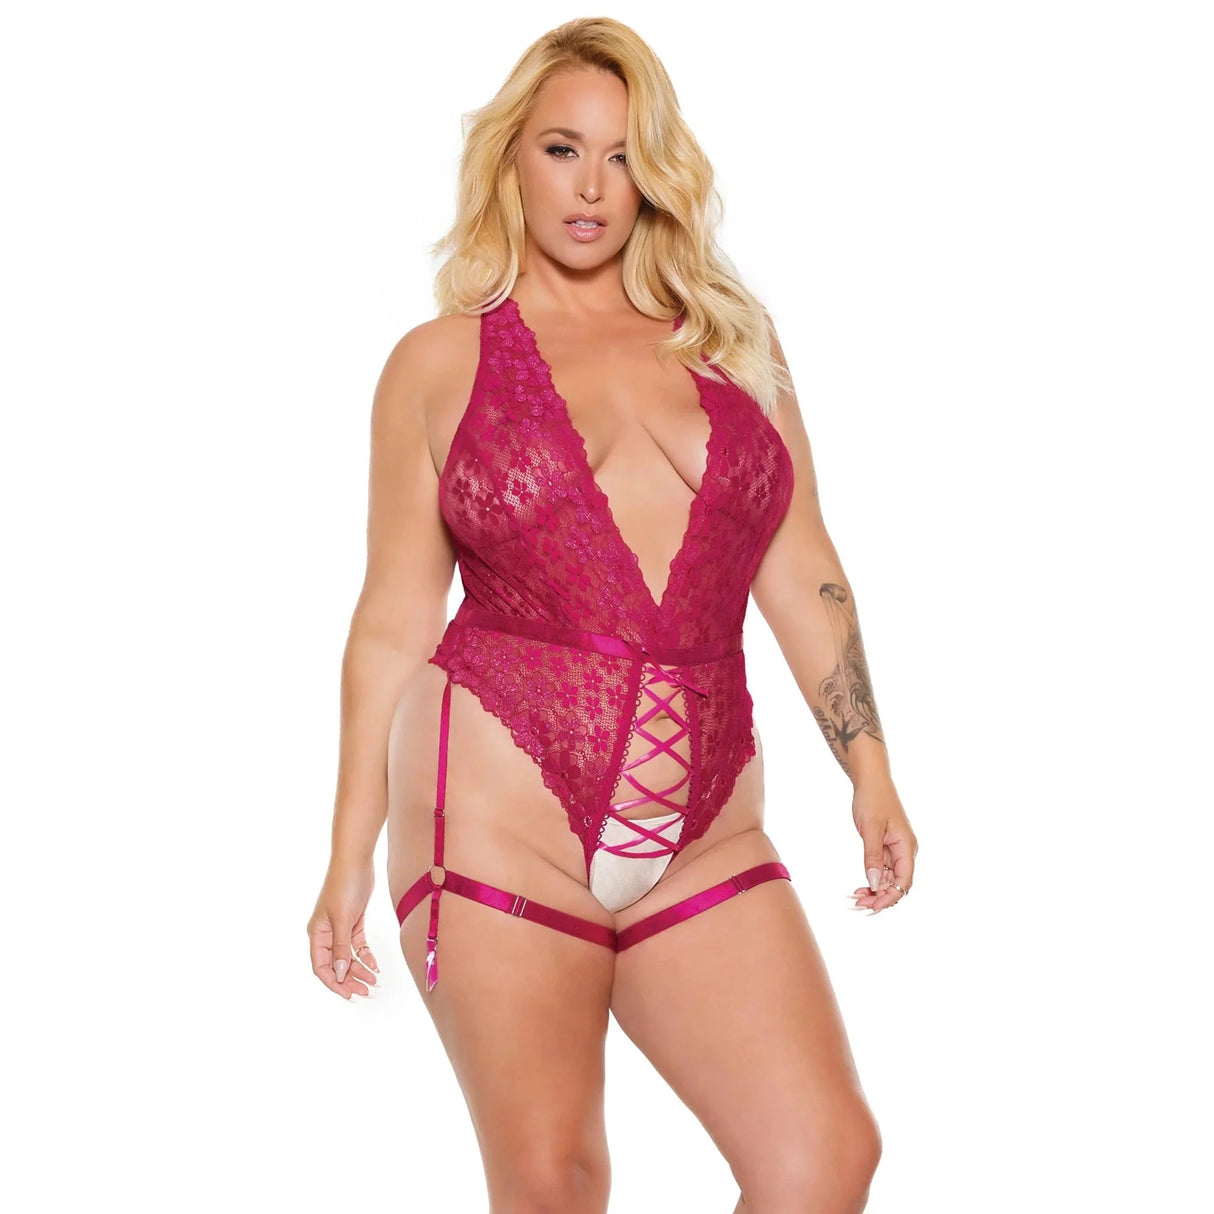 Scallop Stretch Lace Crotchless Teddy